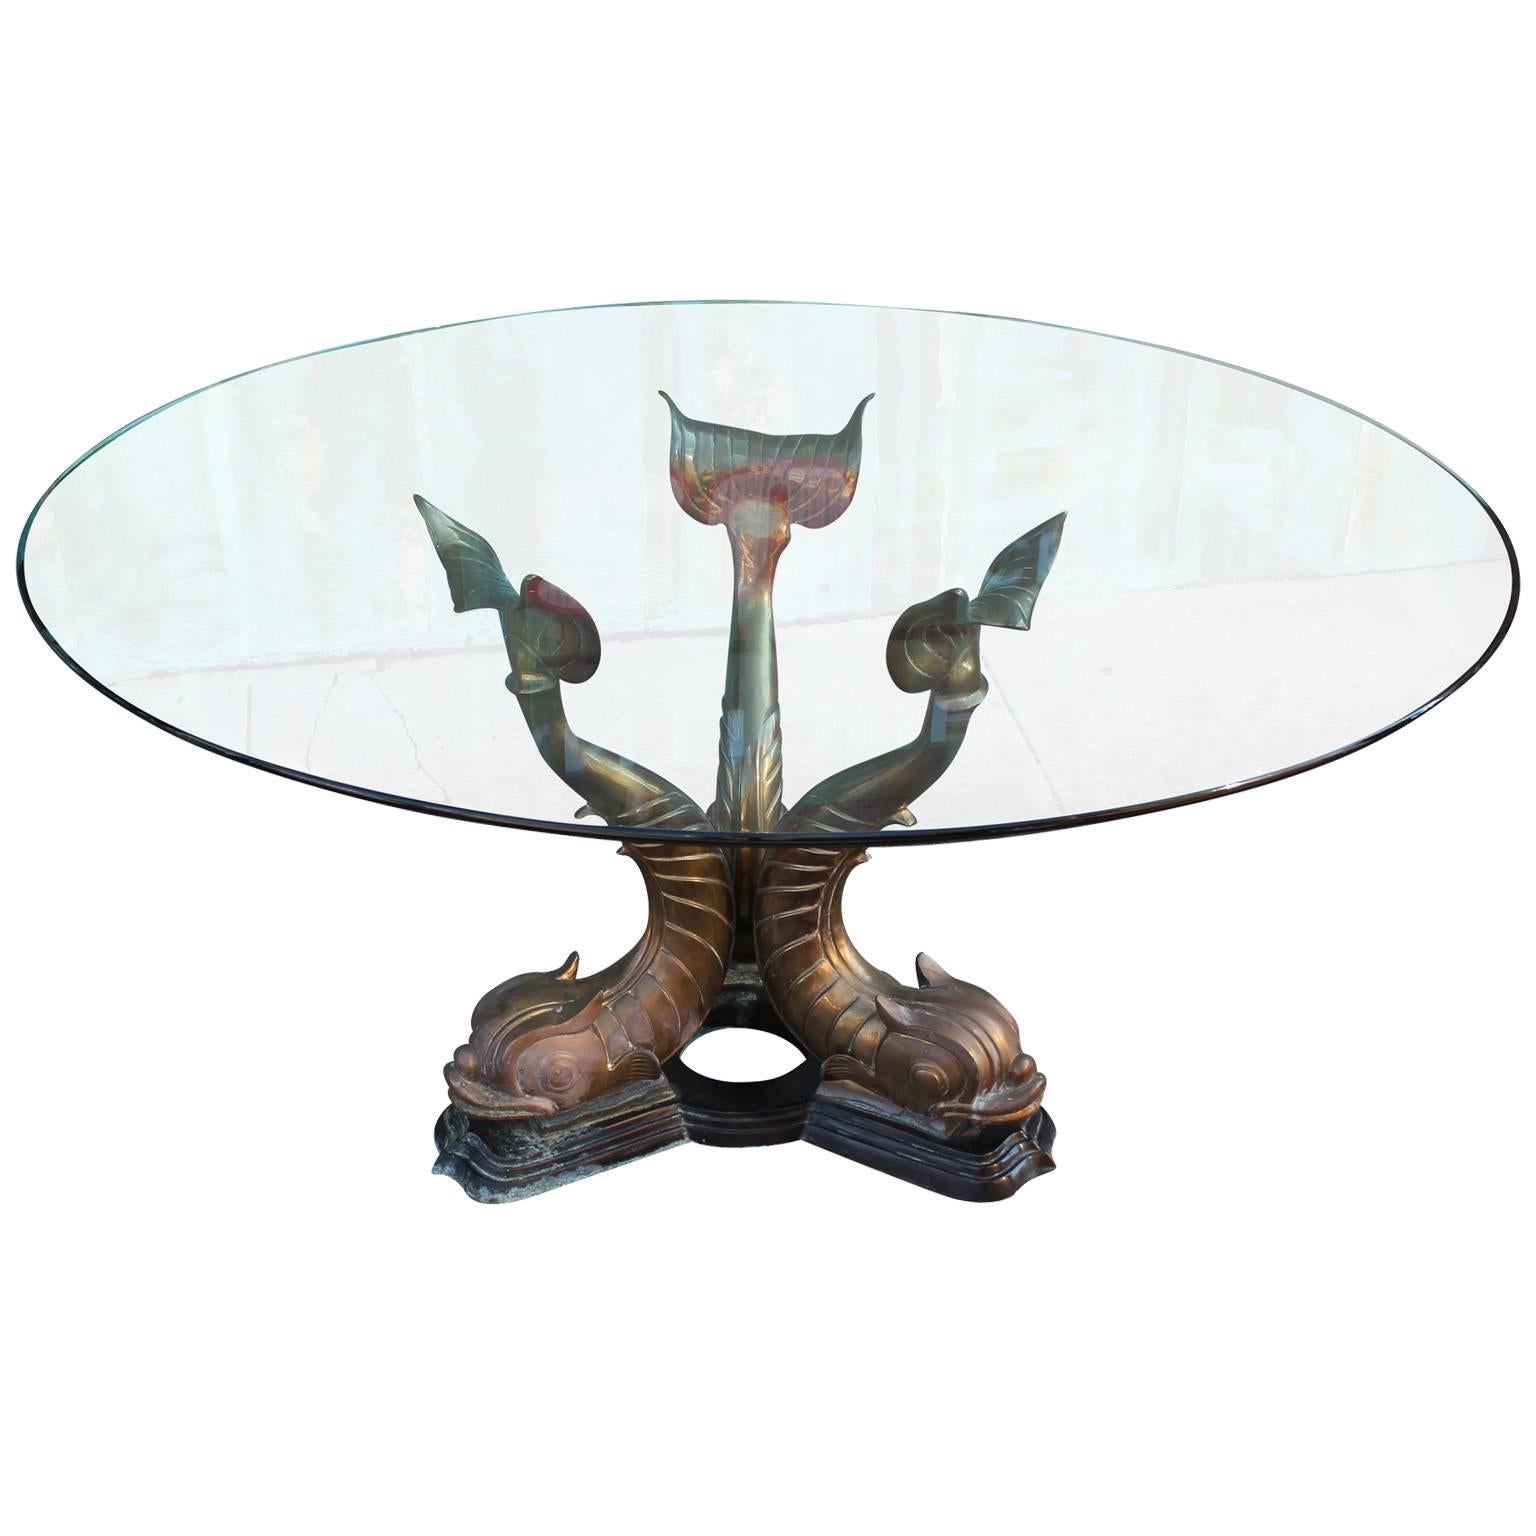 Fabulous Round Brass and Glass Dolphin Fish Dining Table